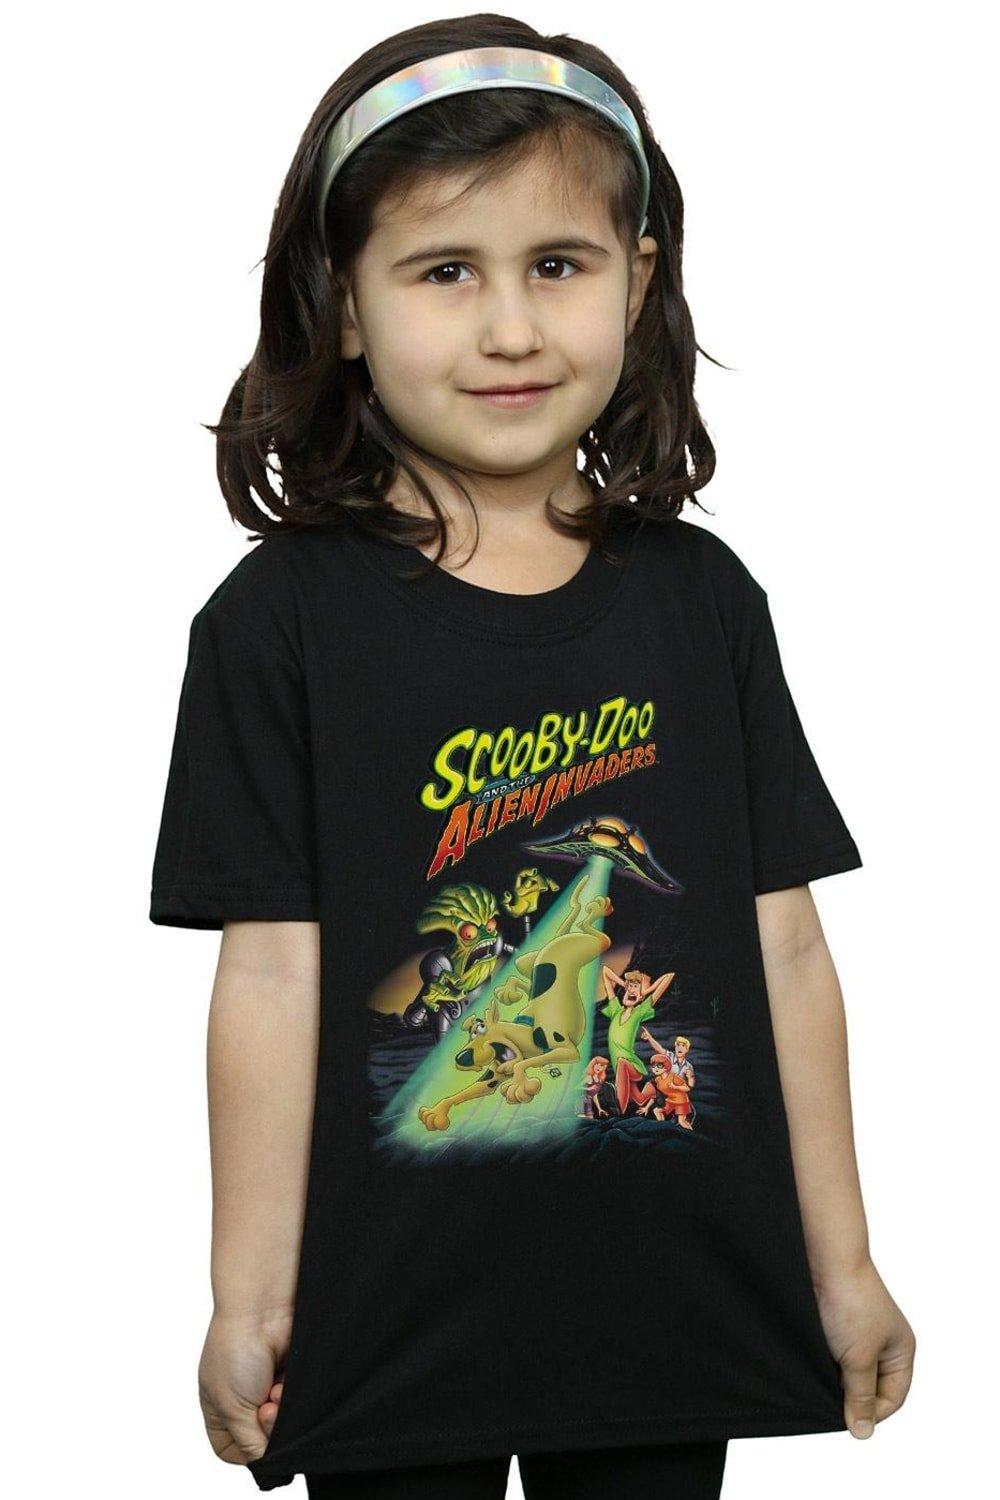 And The Alien Invaders Cotton T-Shirt